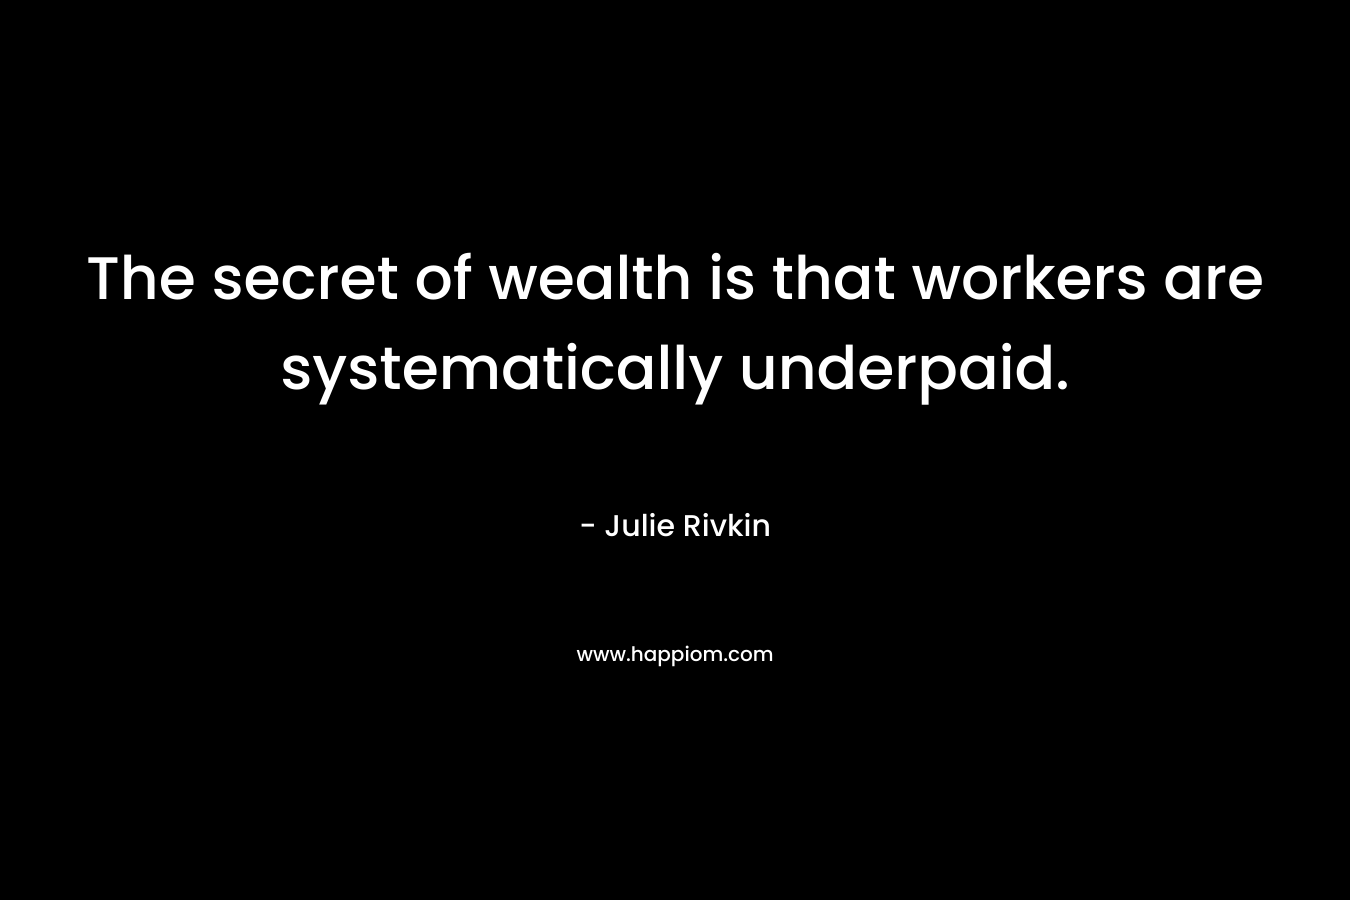 The secret of wealth is that workers are systematically underpaid. – Julie Rivkin